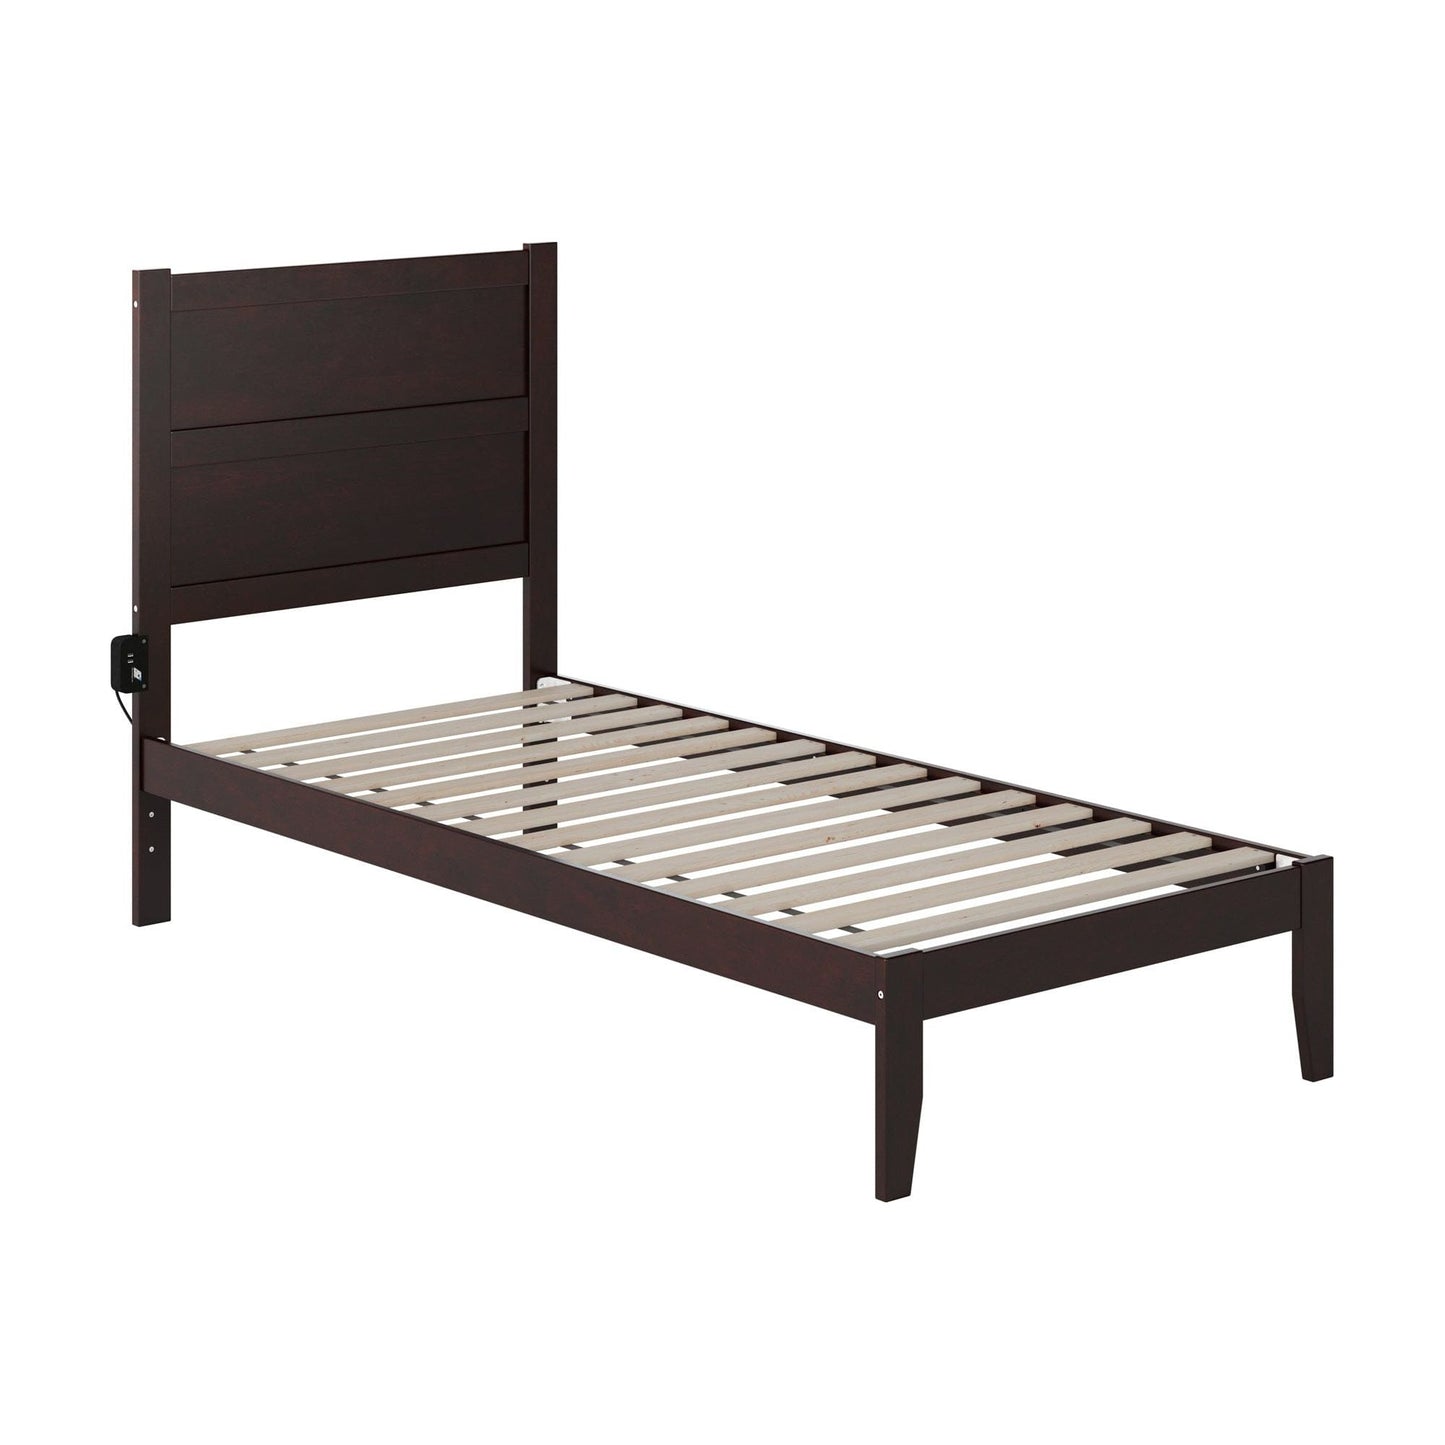 AFI Furnishings NoHo Twin Extra Long Bed in Espresso AG9110011